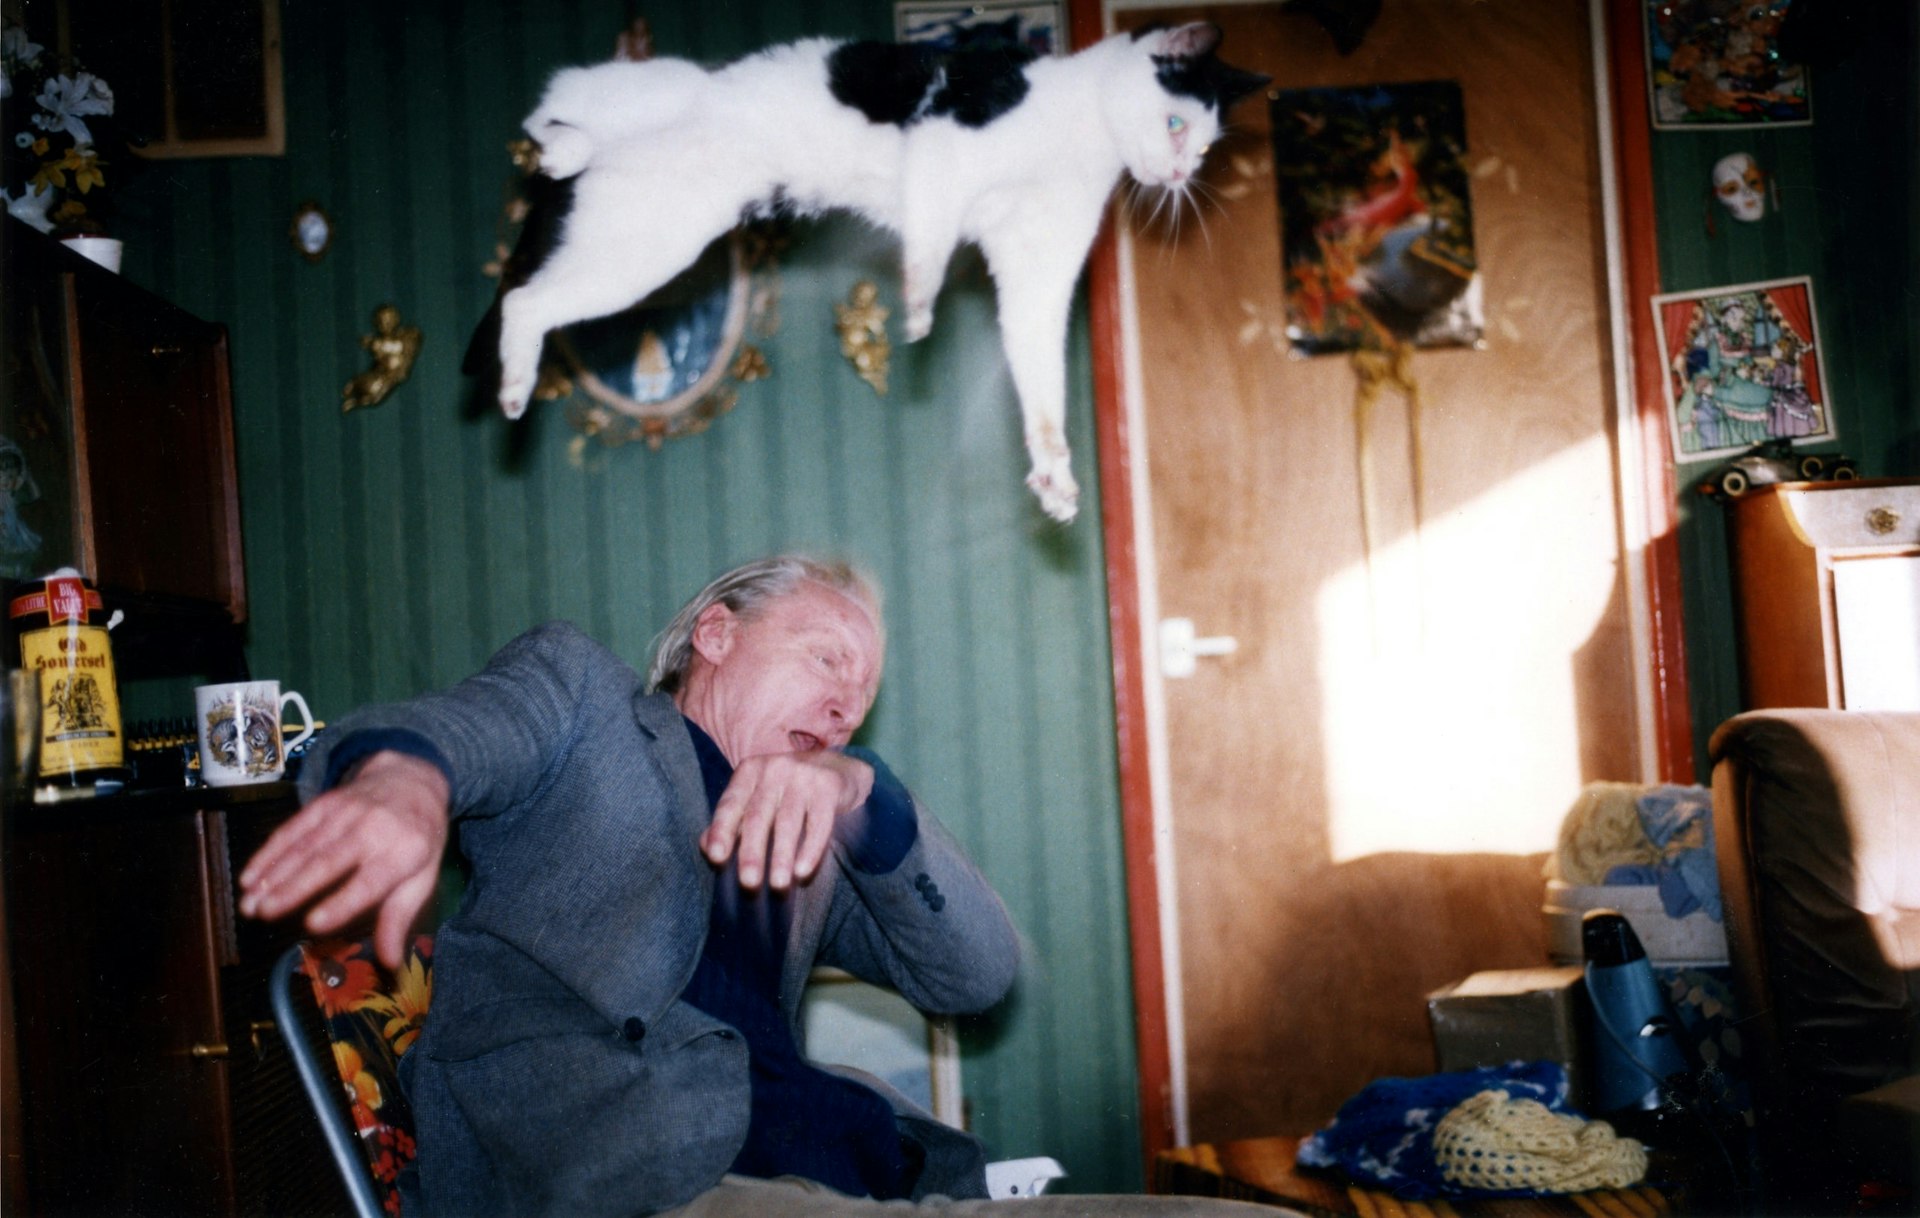 Richard Billingham translates his ‘80s working class family photography to the big screen